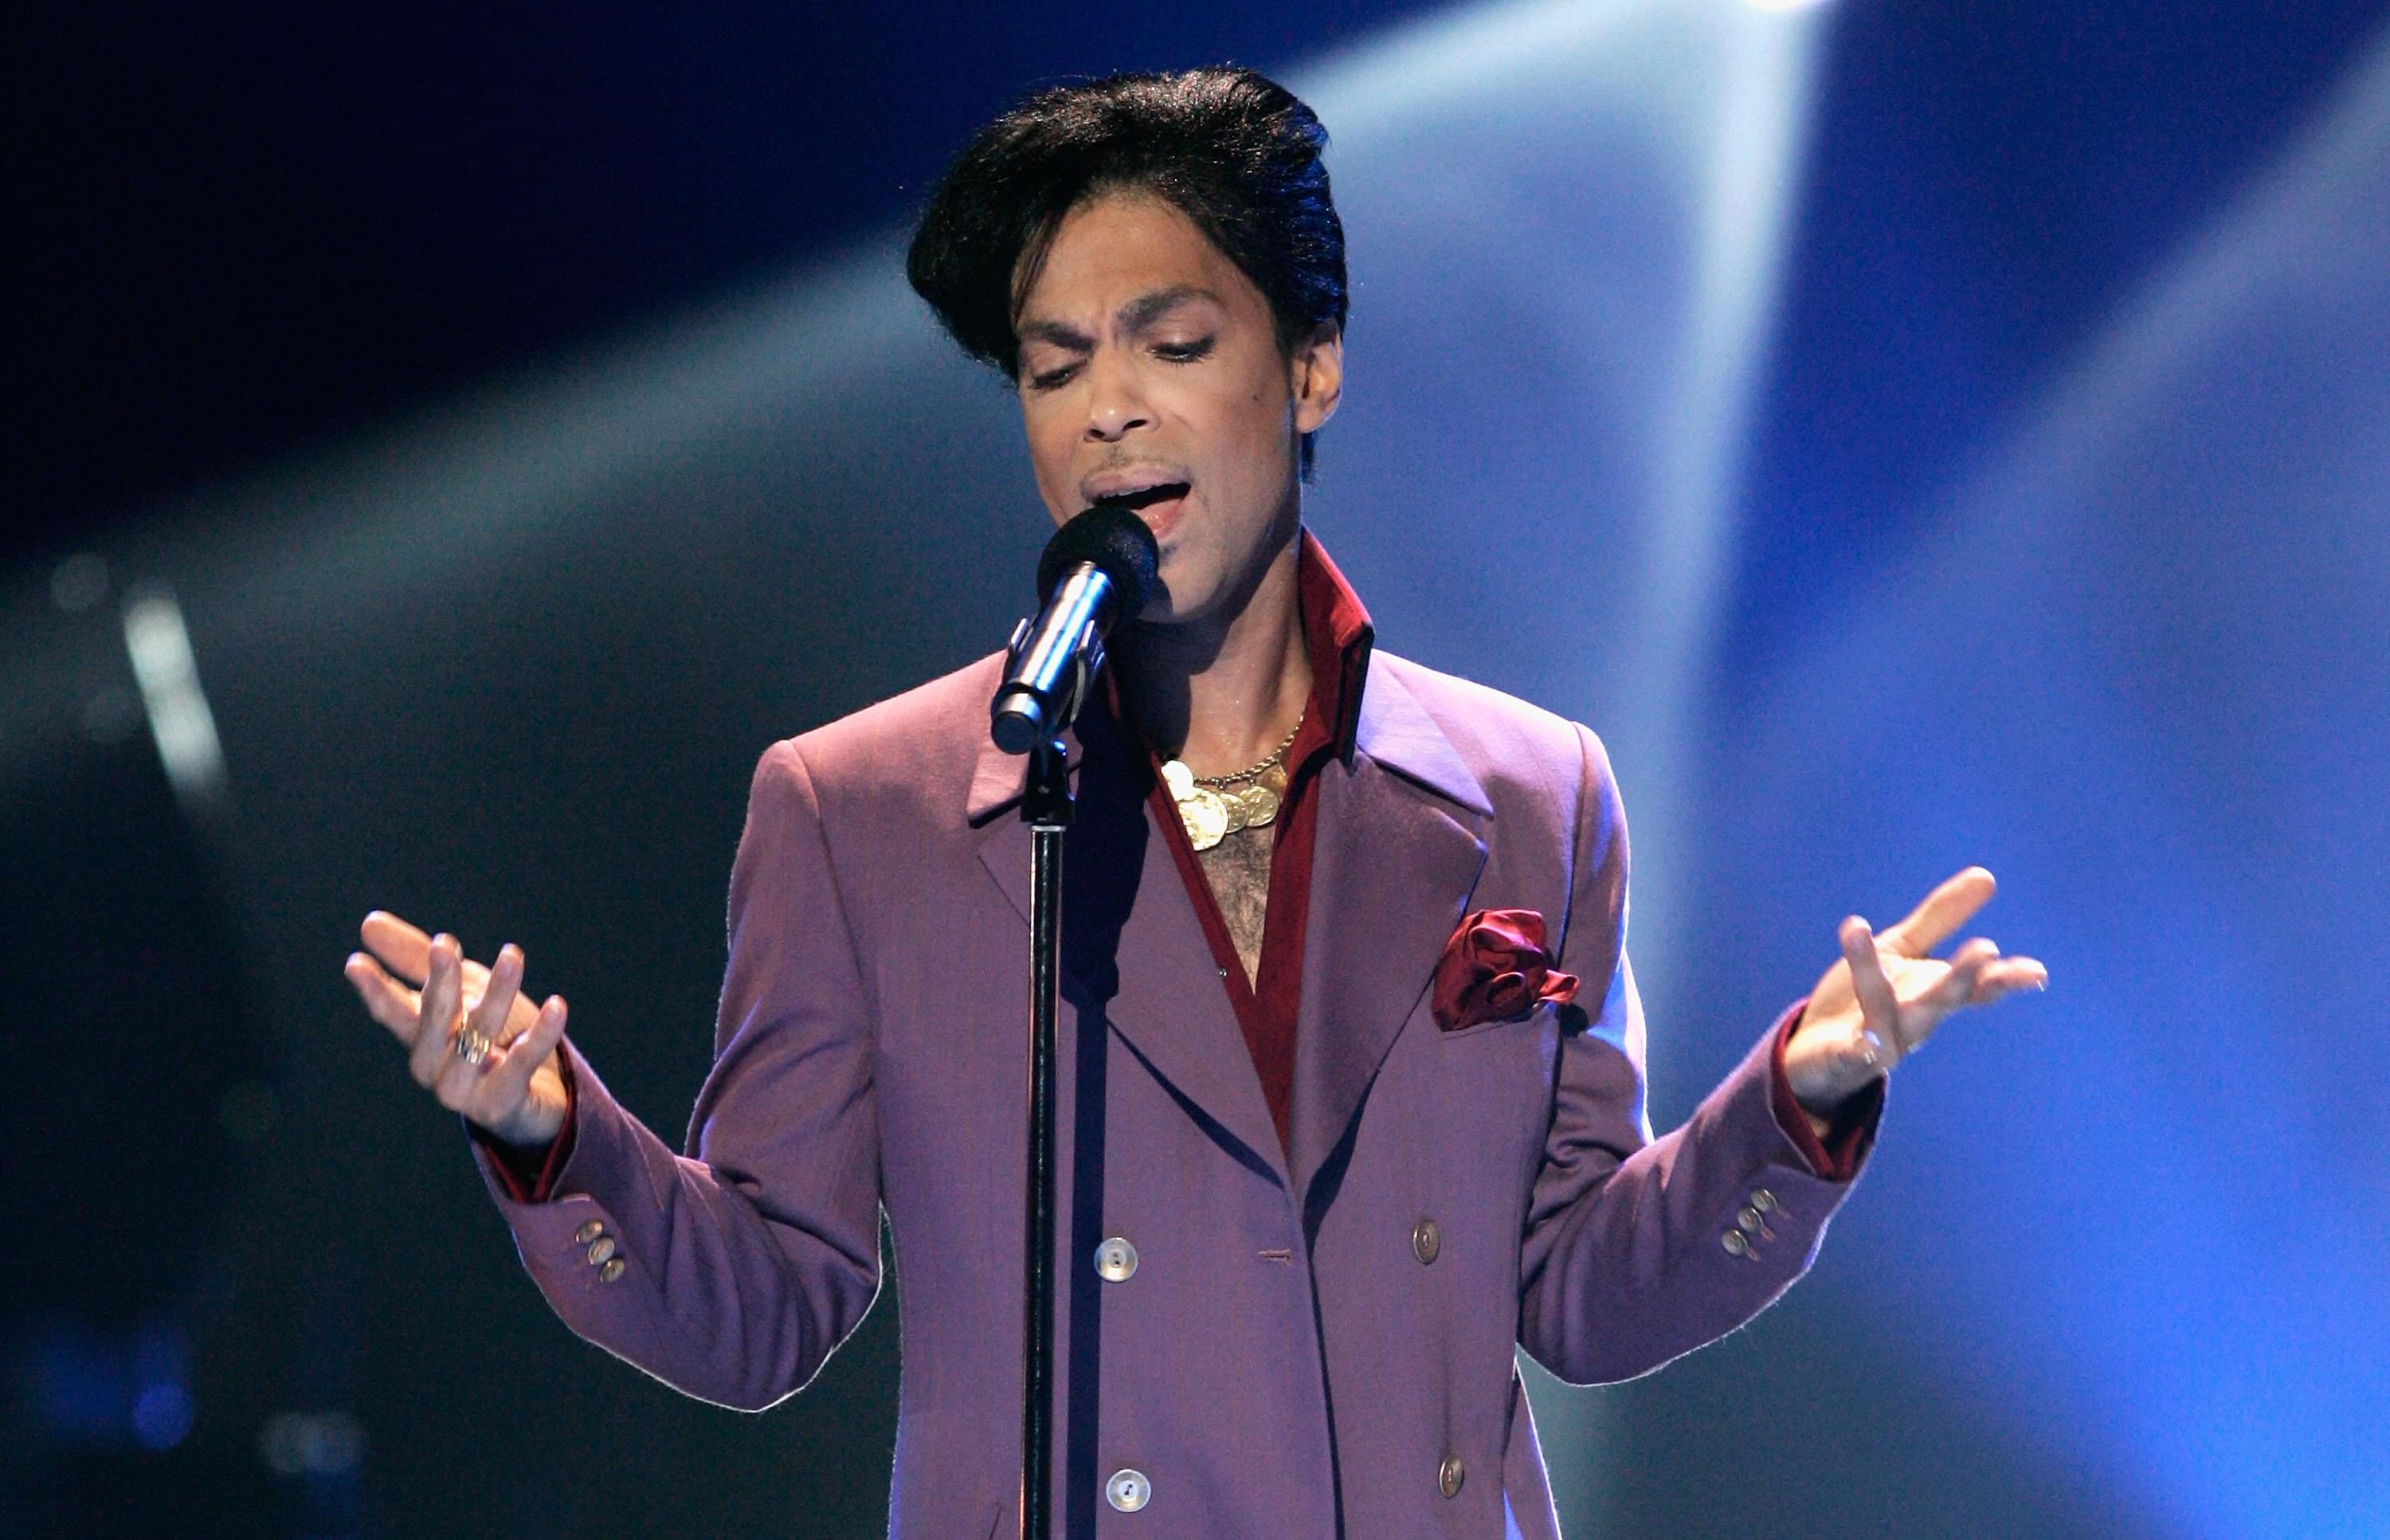 Prince Fans Shocked That His Music Will Be Used In Credit Card Commercial